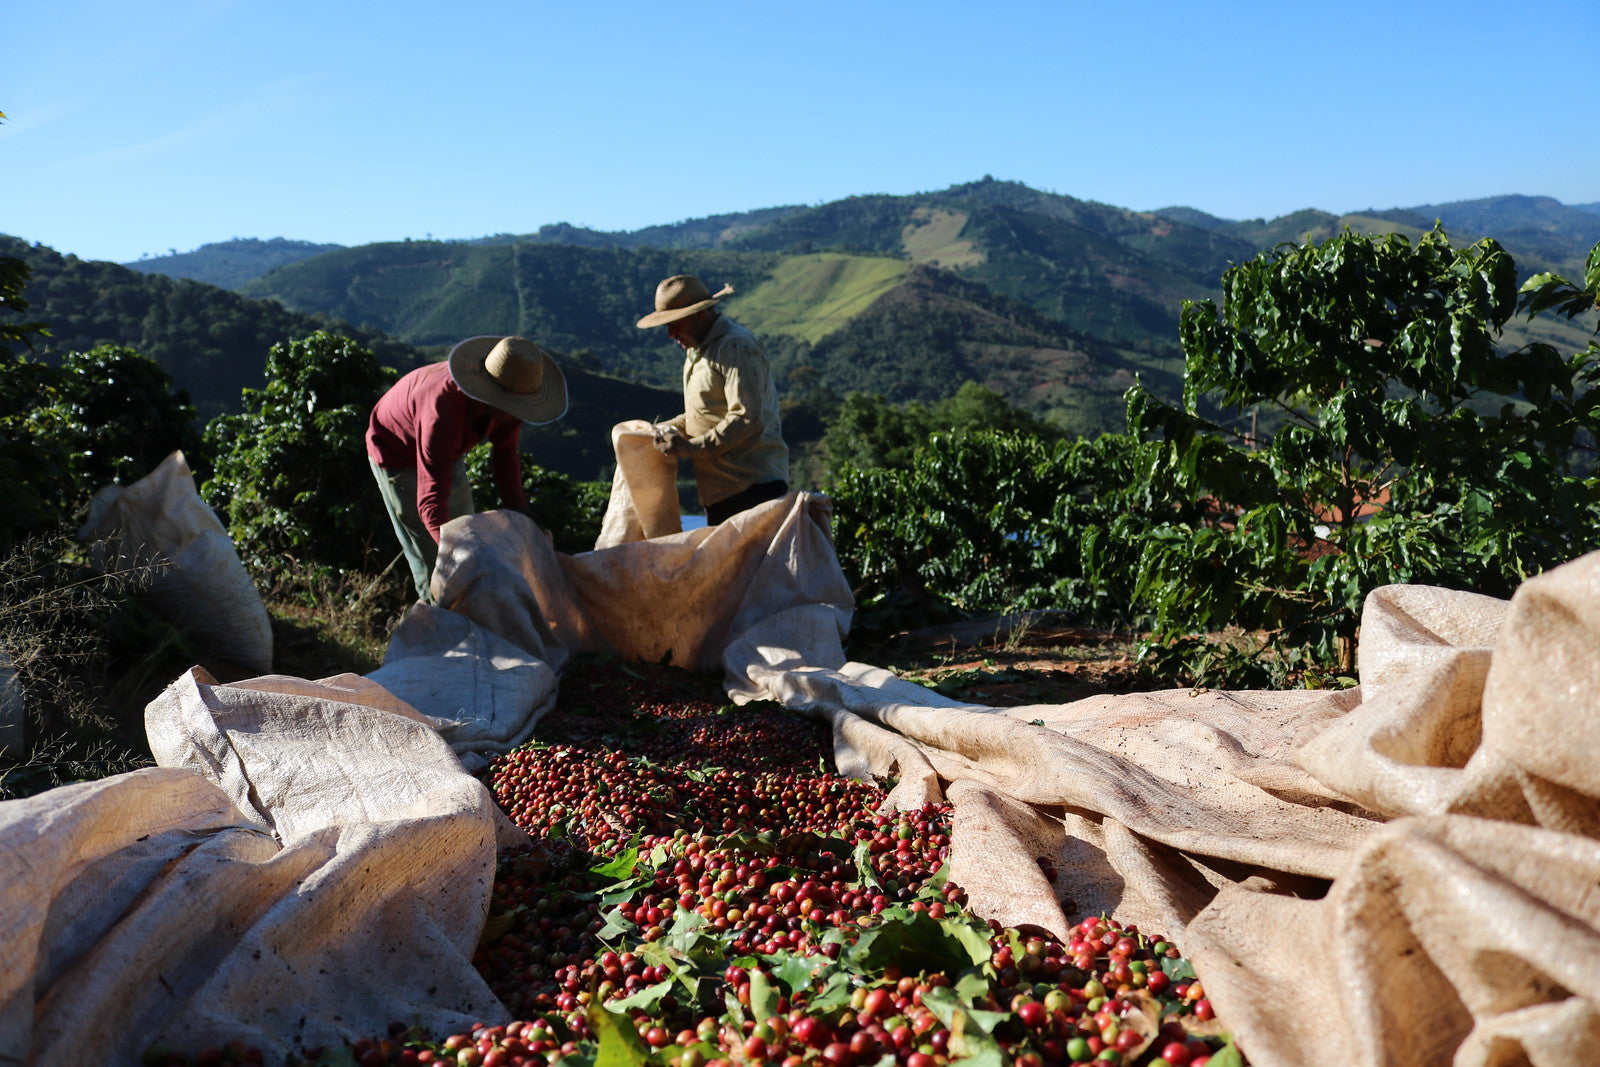 A couple of coffee farmers getting coffee cherries ready for drying.